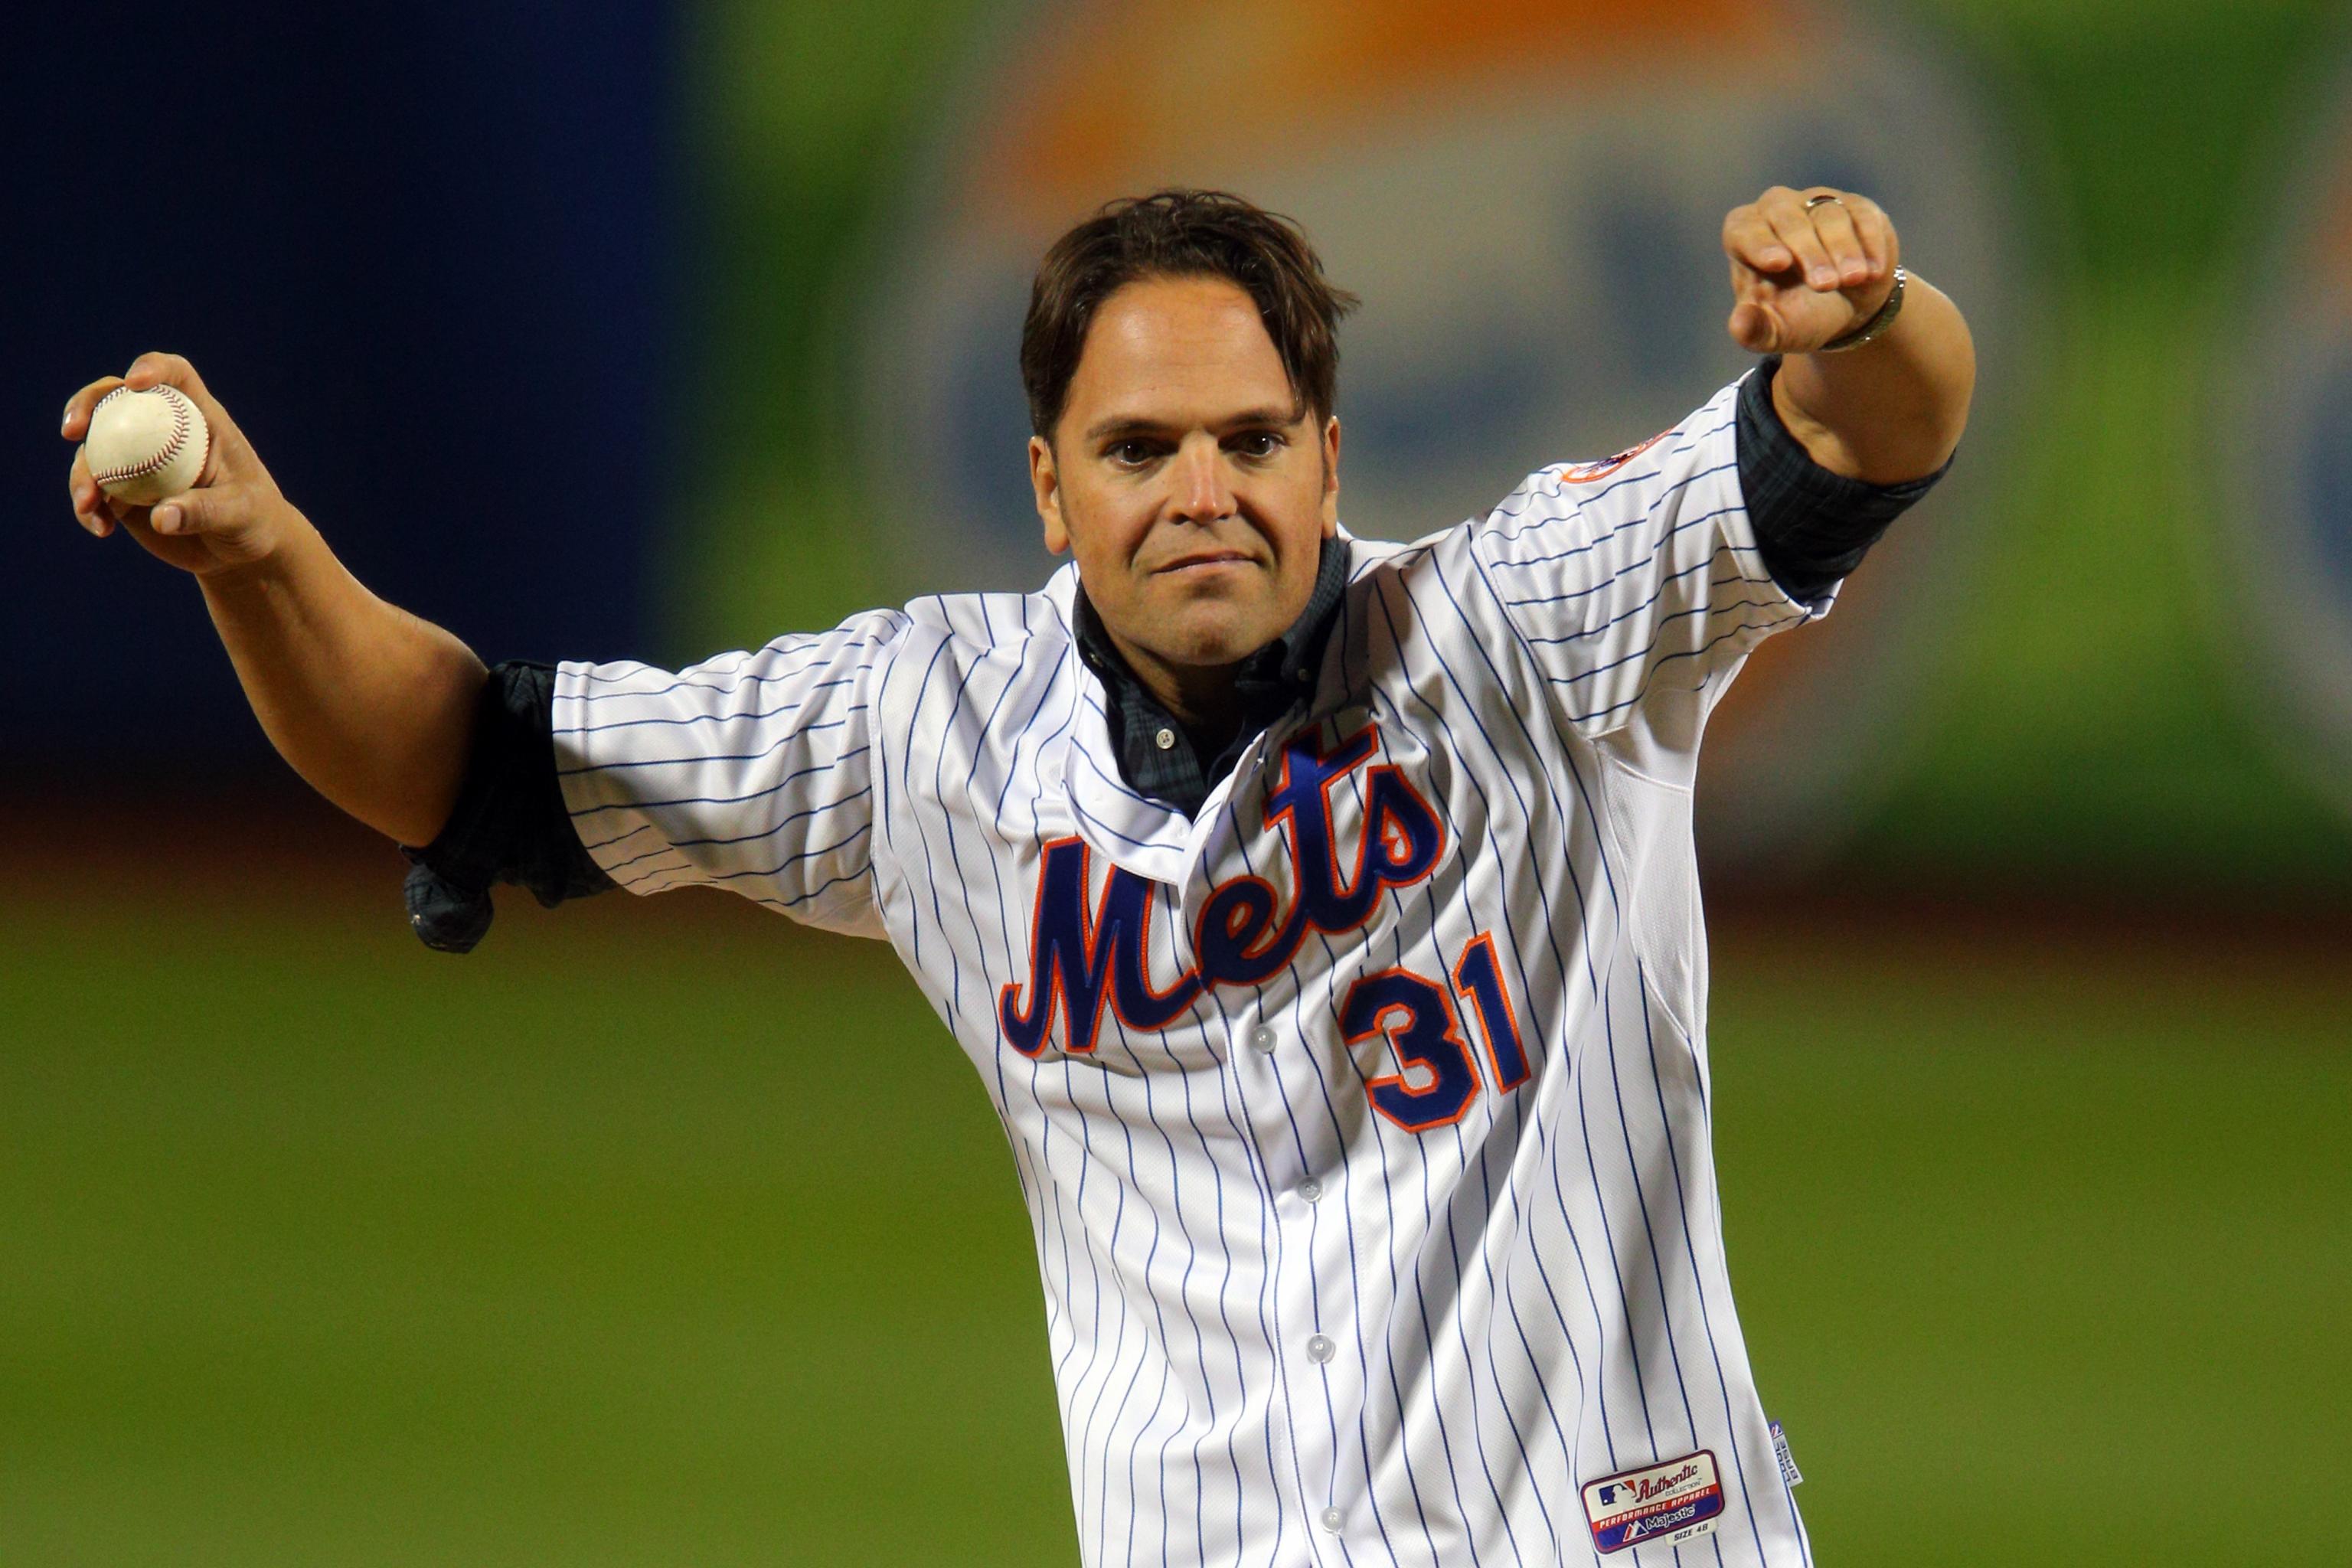 Mets Hall of Famer Mike Piazza's Return to New York